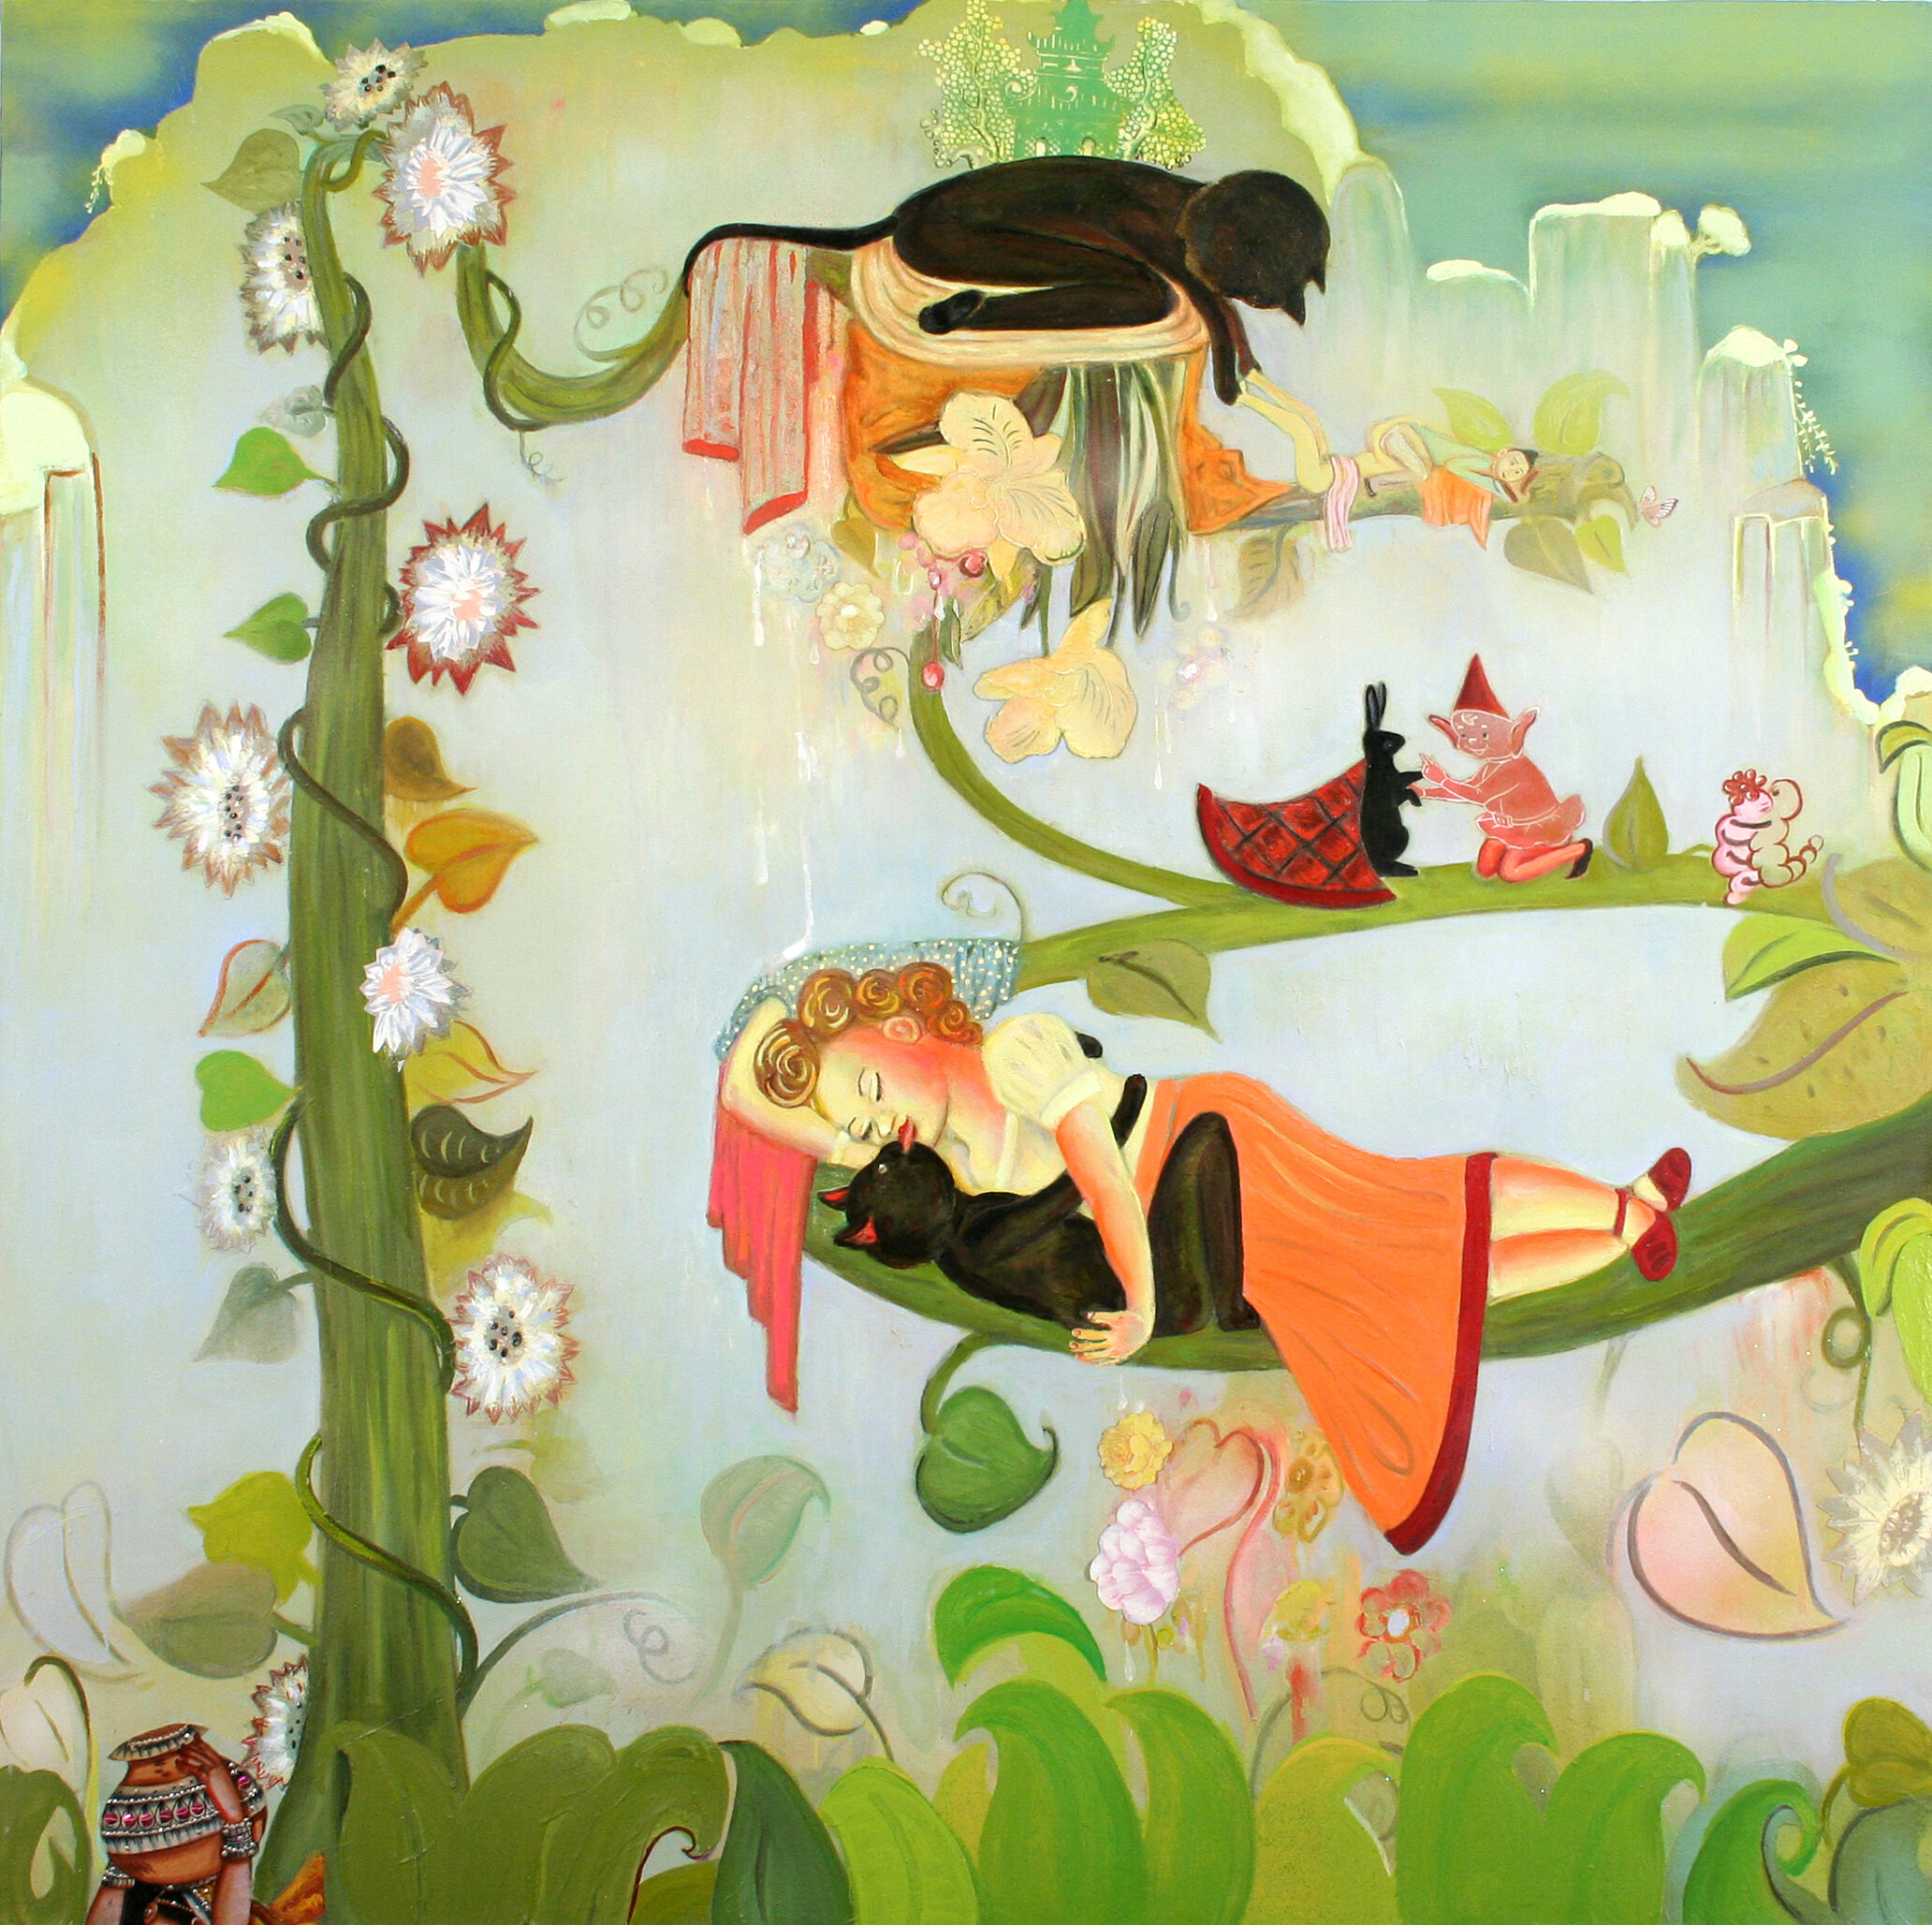 A Dilly-Dally with Pretty Sally, 60" × 60", mixed media and collage on canvas, 2006